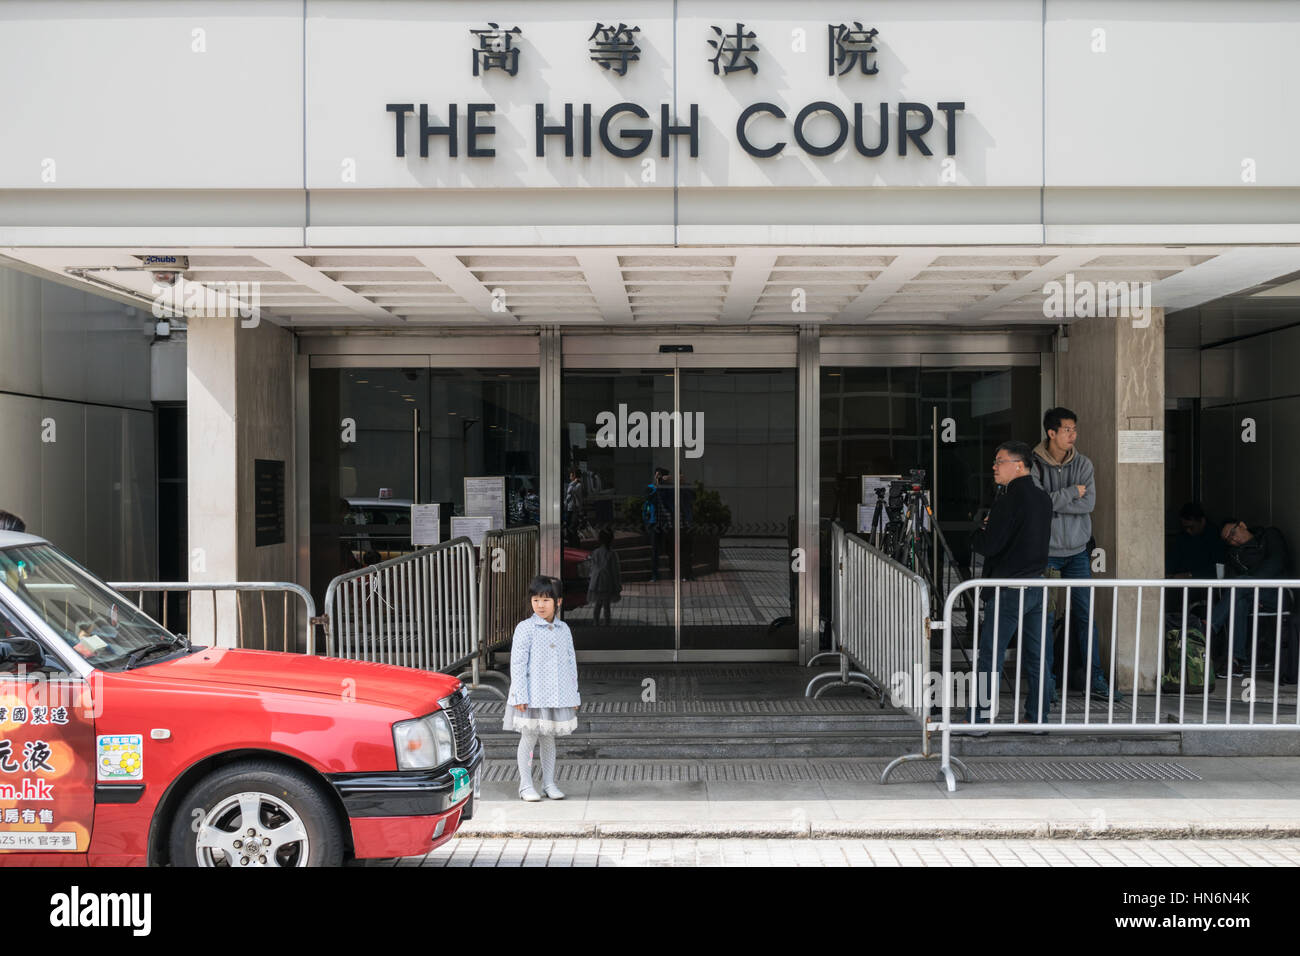 Exterior entrance of The High Court in Hong Kong Stock Photo